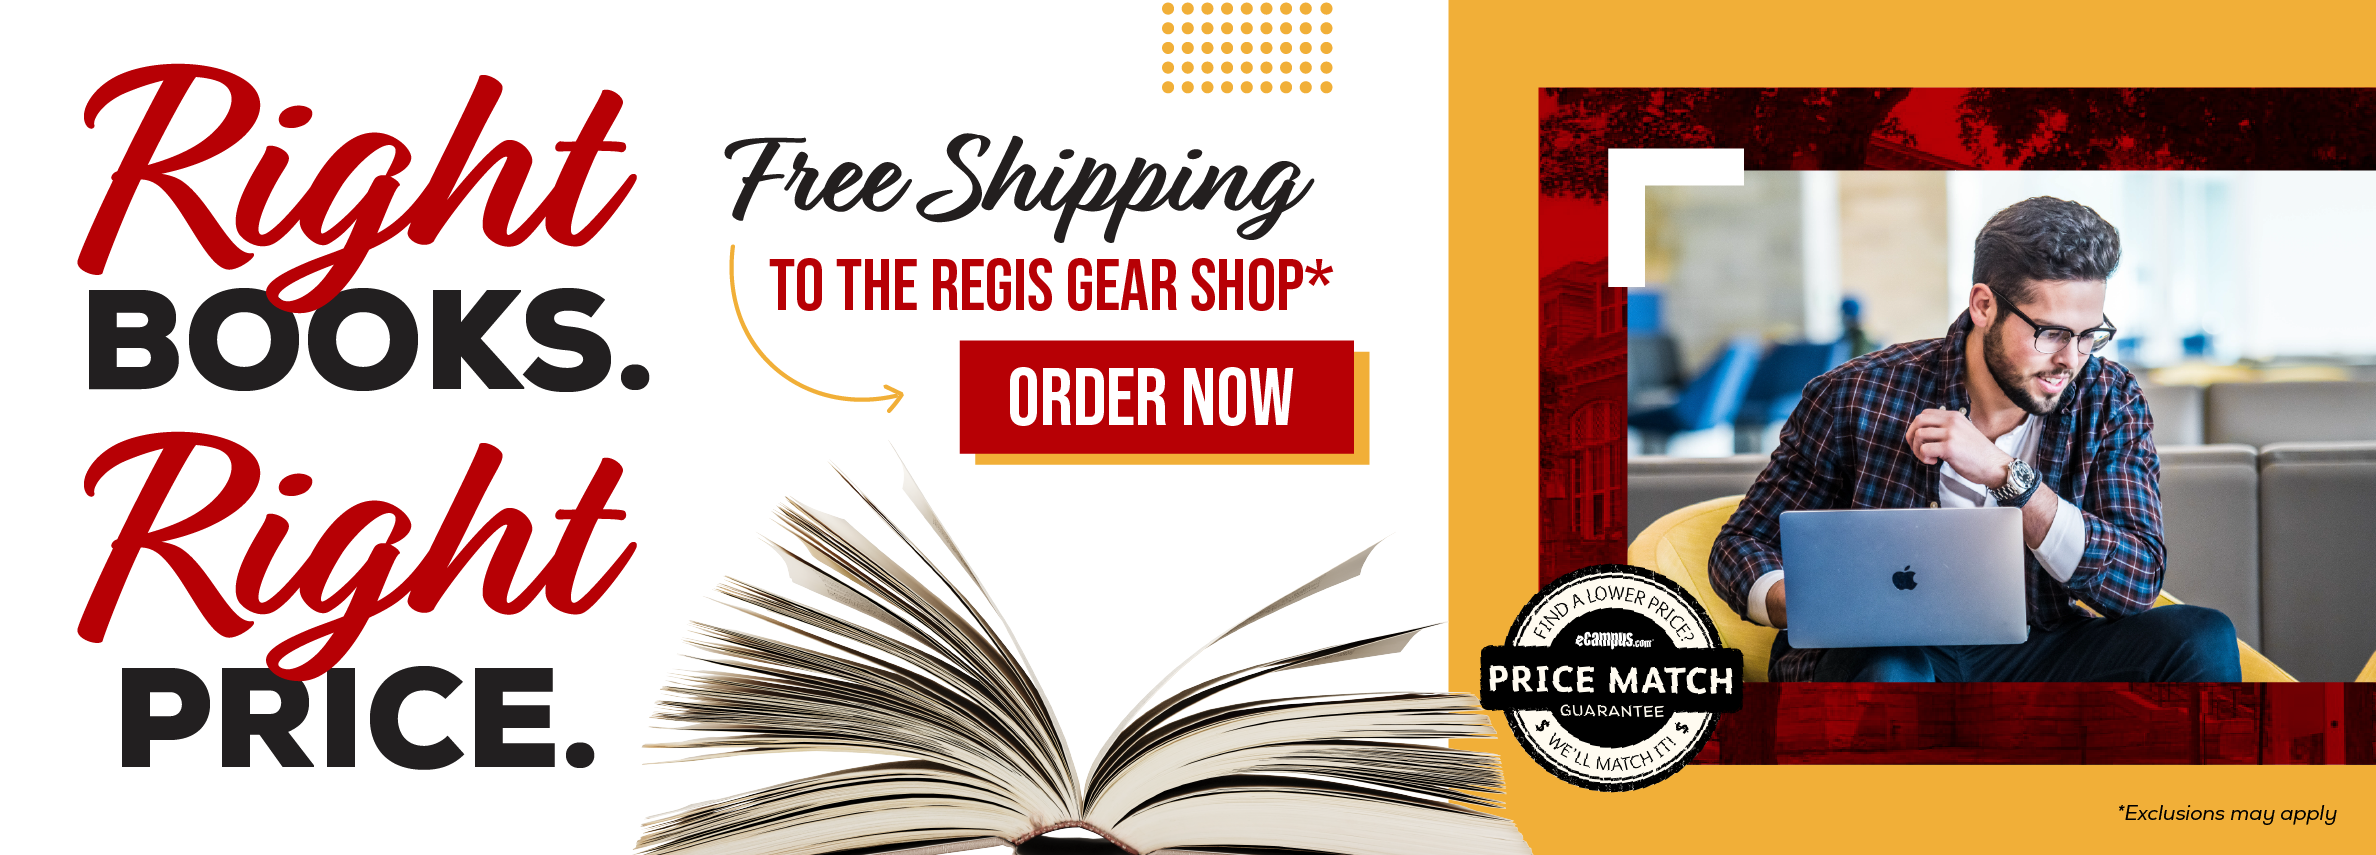 Right books. Right price. Free shipping to the Regis Gear Shop.* Order now. Price Match Guarantee. *Exclusions may apply.